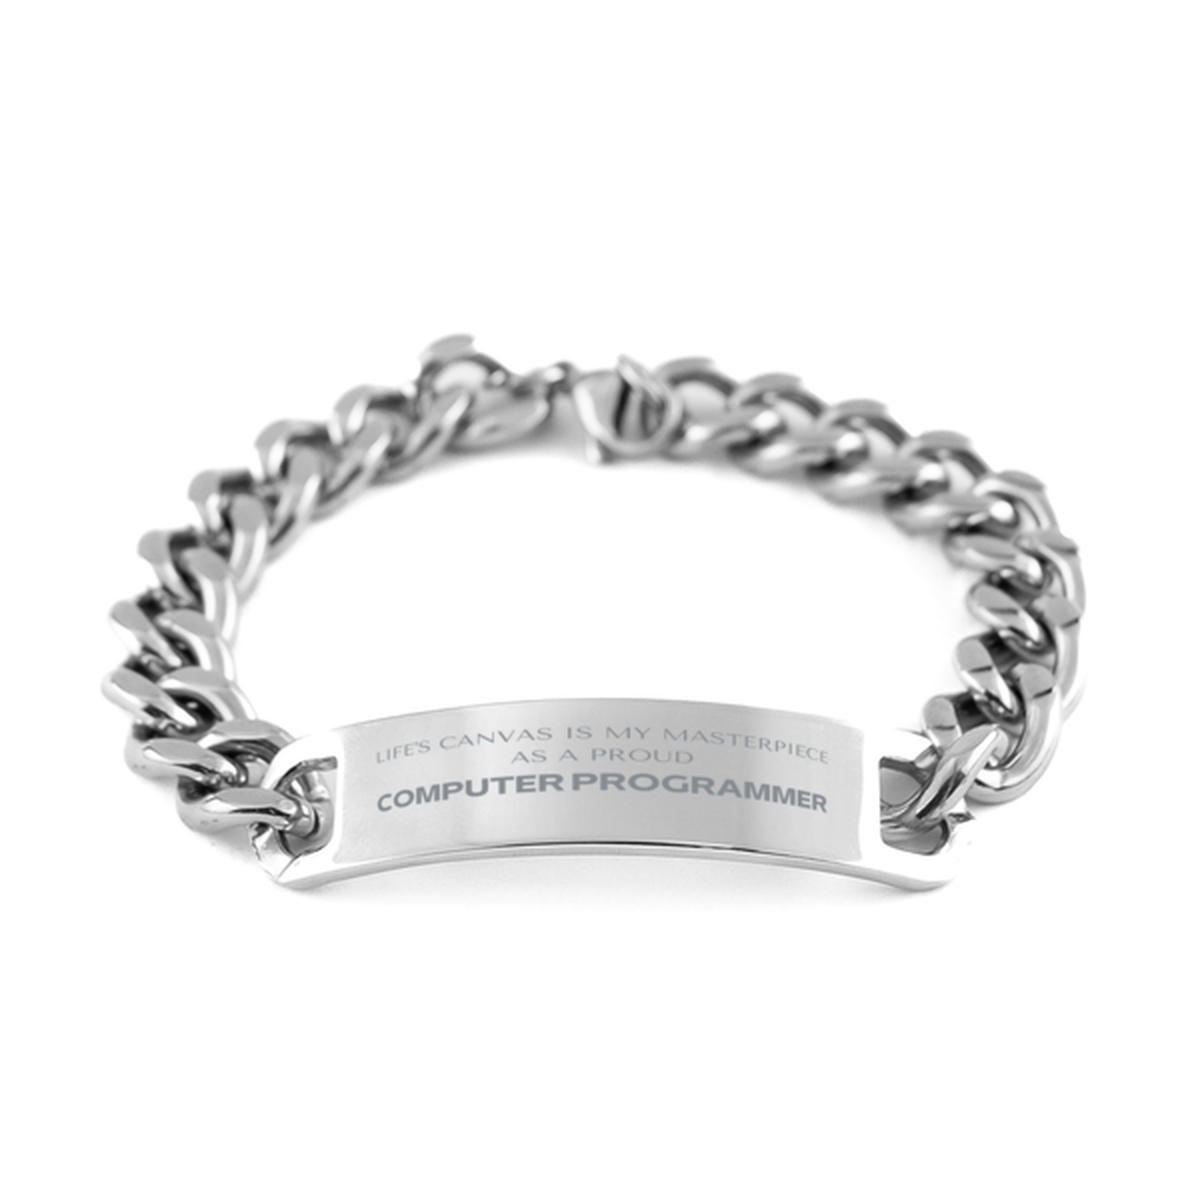 Proud Computer Programmer Gifts, Life's canvas is my masterpiece, Epic Birthday Christmas Unique Cuban Chain Stainless Steel Bracelet For Computer Programmer, Coworkers, Men, Women, Friends